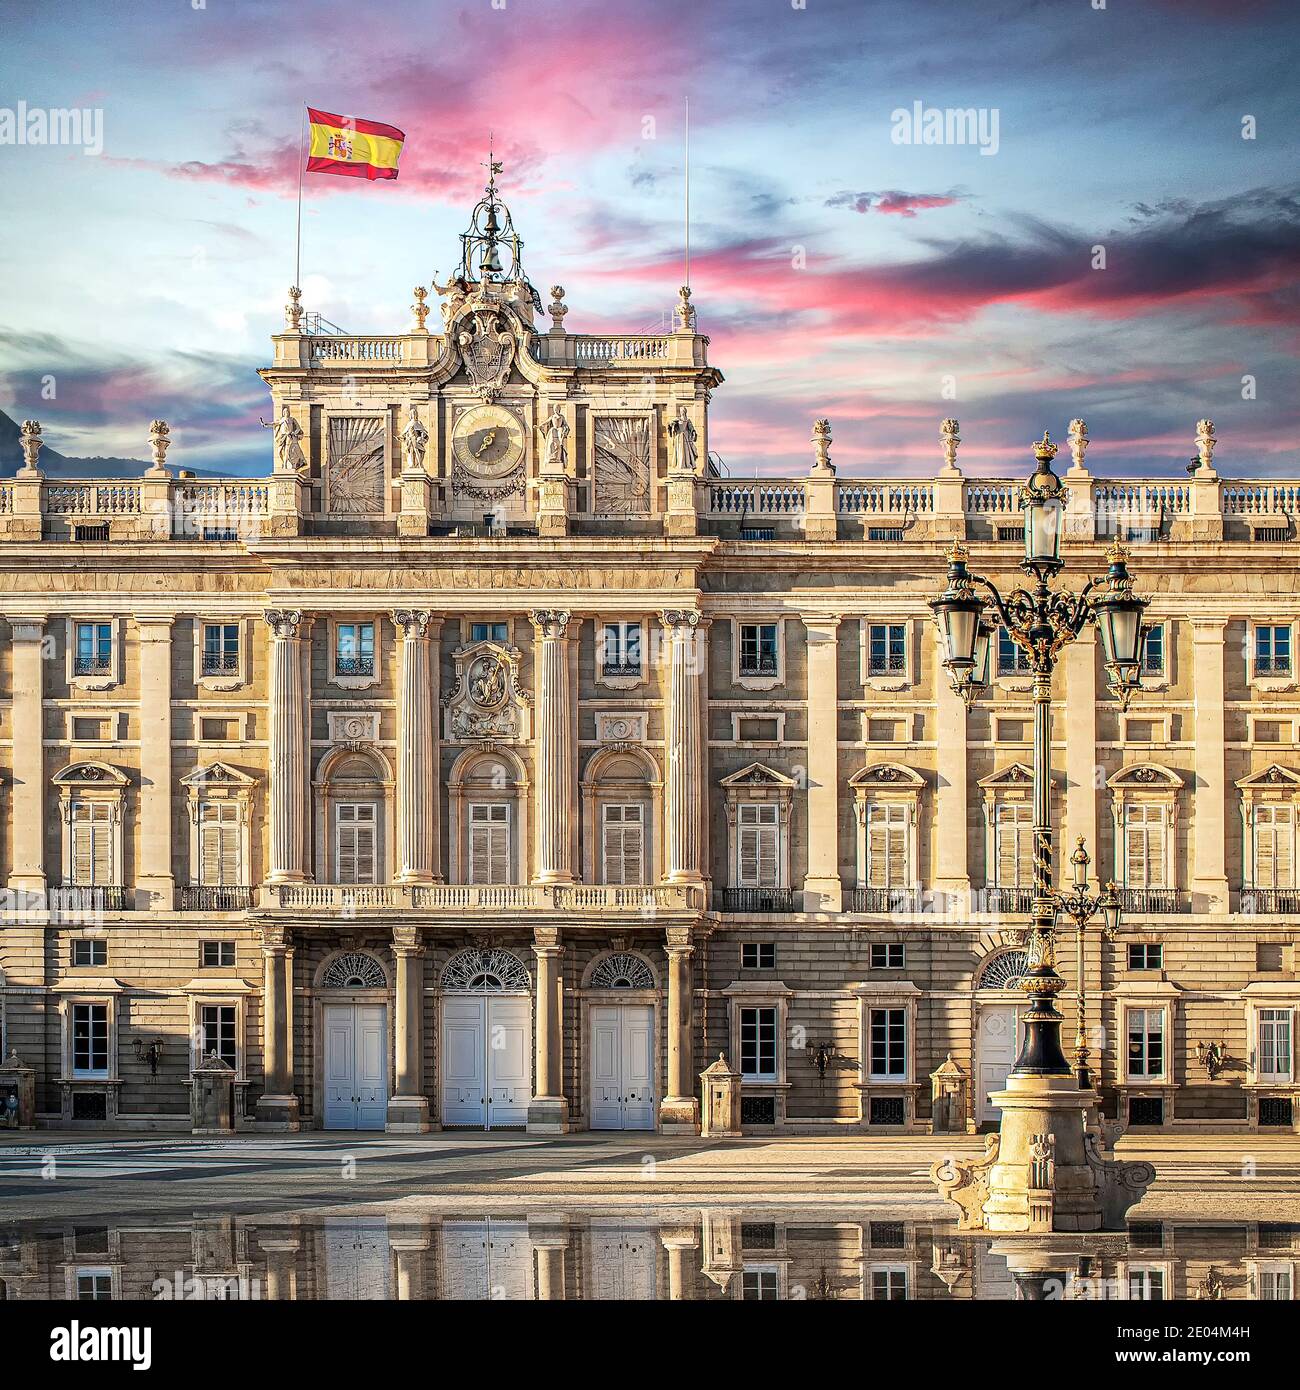 Royal Palace of Madrid, Spain at sunset with pink clouds. Stock Photo